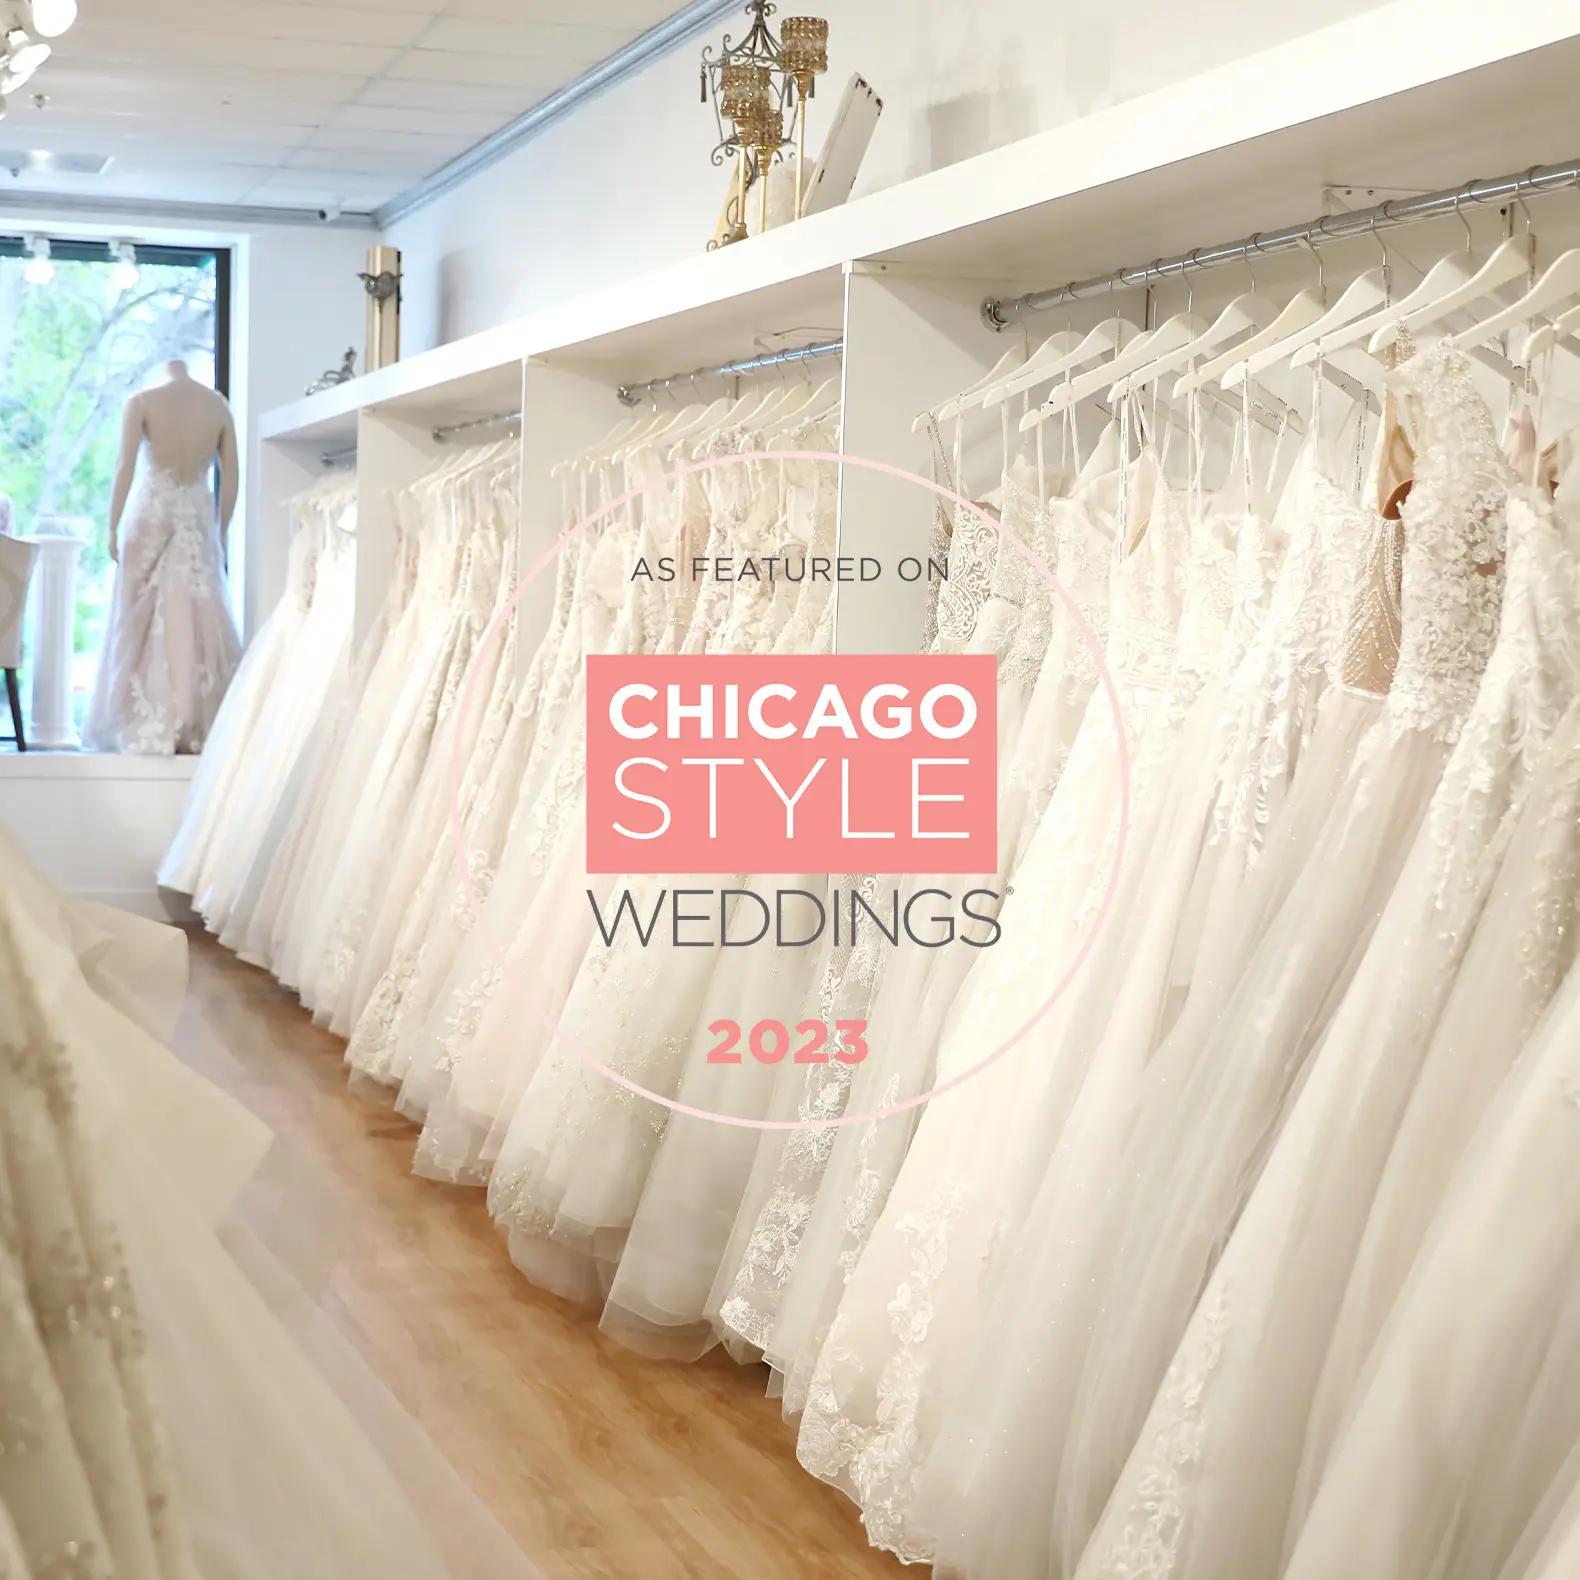 As Featured on Chicago Style Weddings 2023